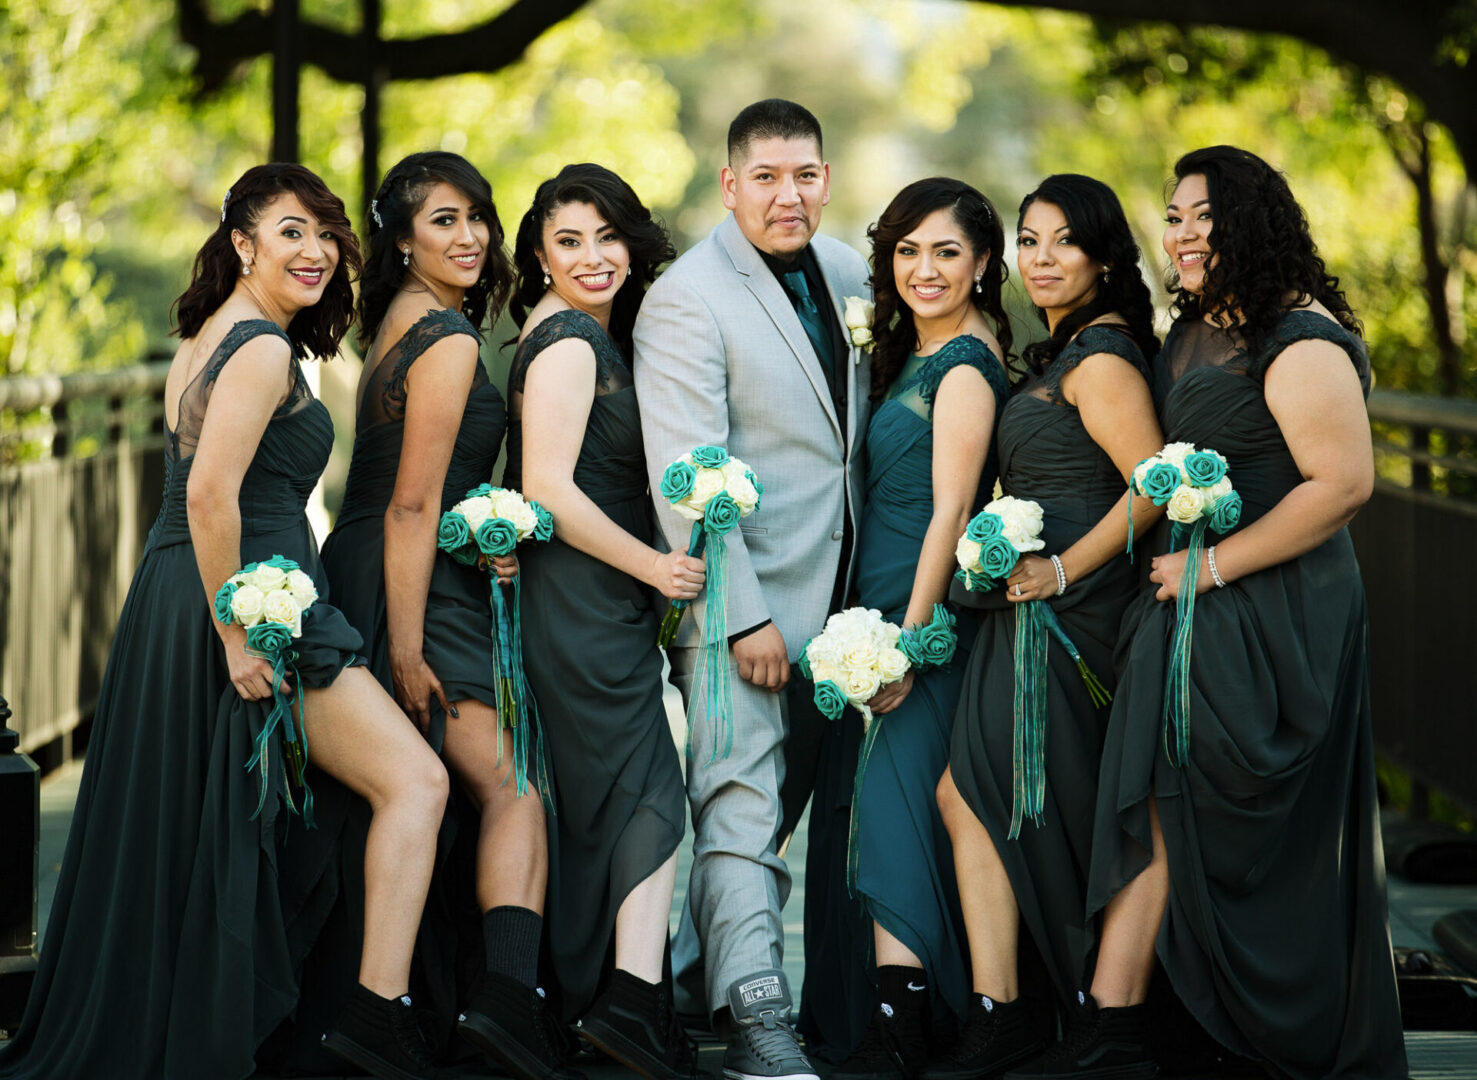 A groom standing with bride and ladies